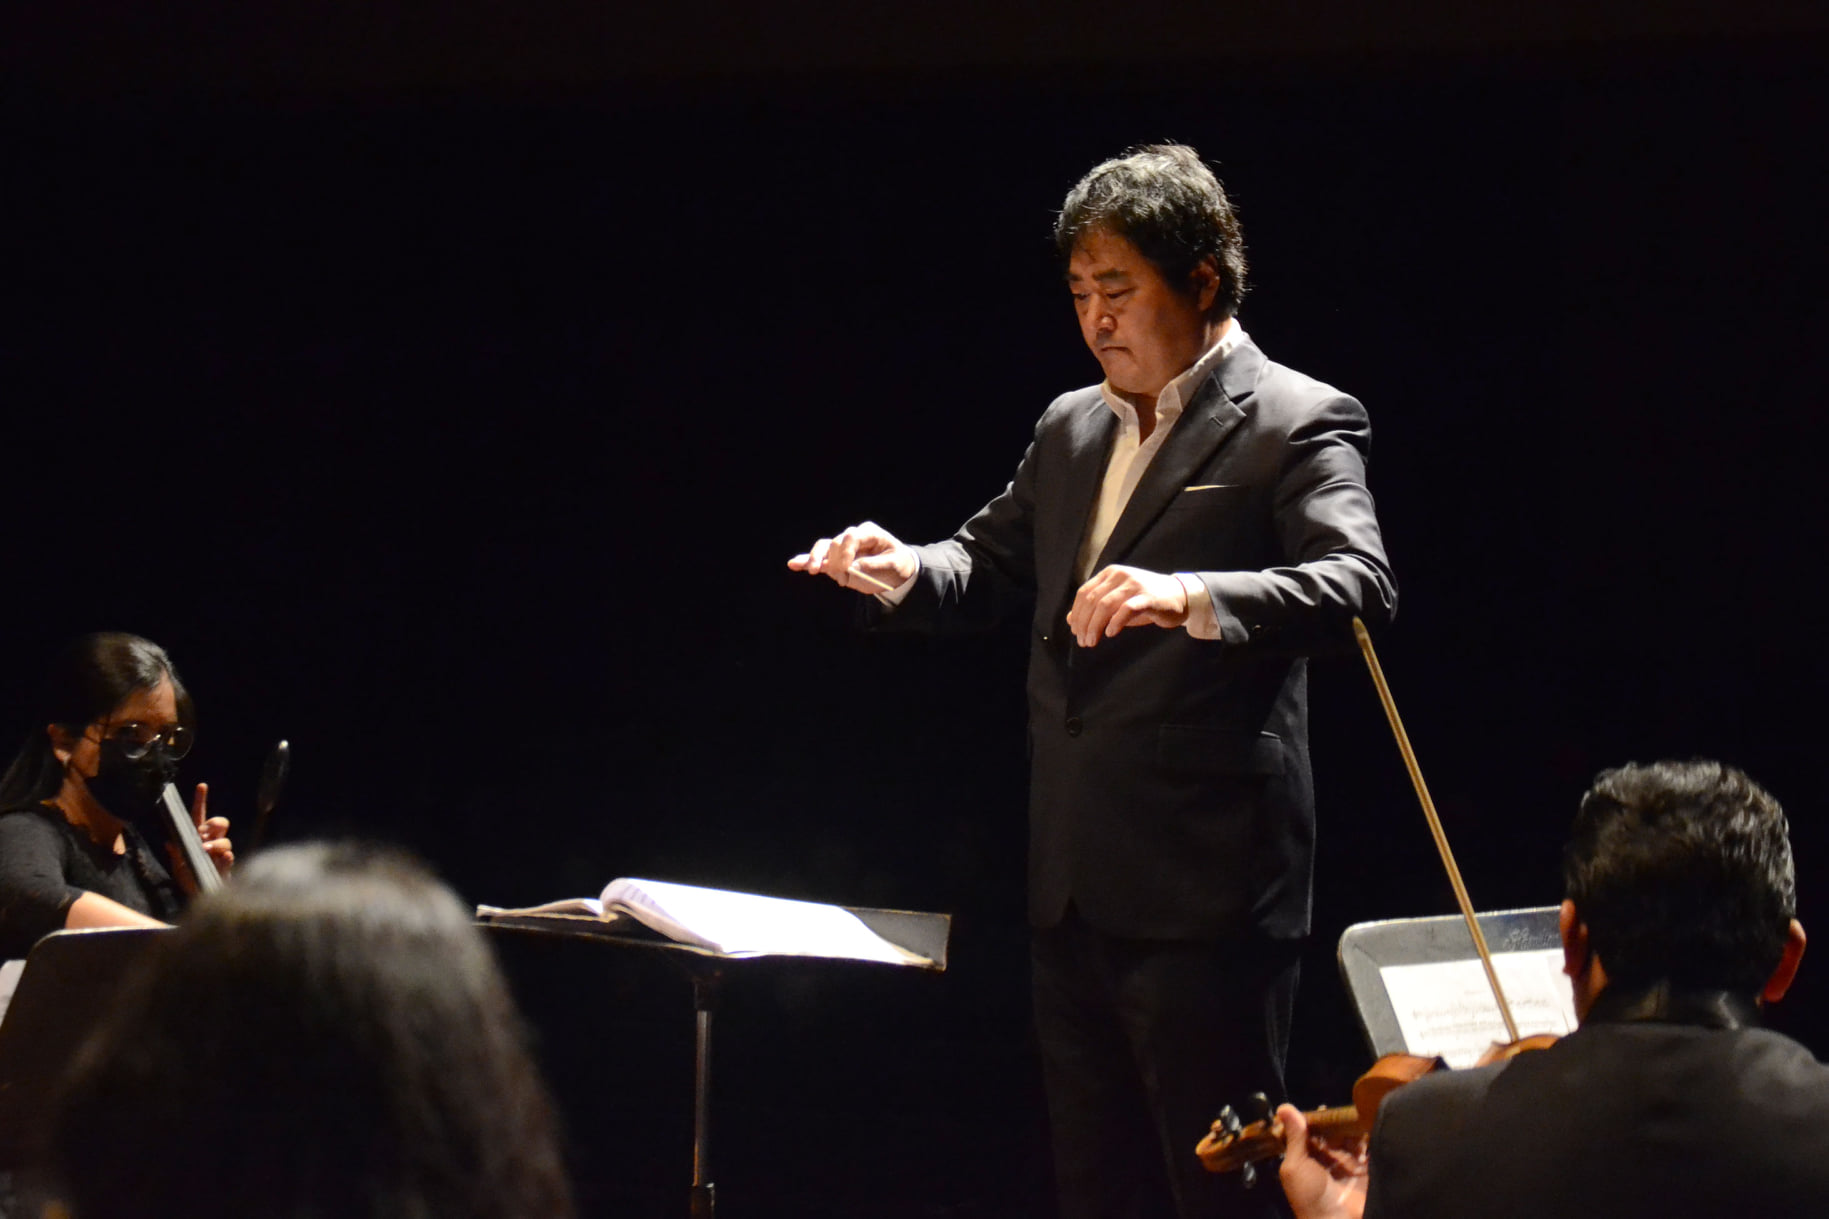 Park Jong-hwi, The First Asian Conductor in Latin America